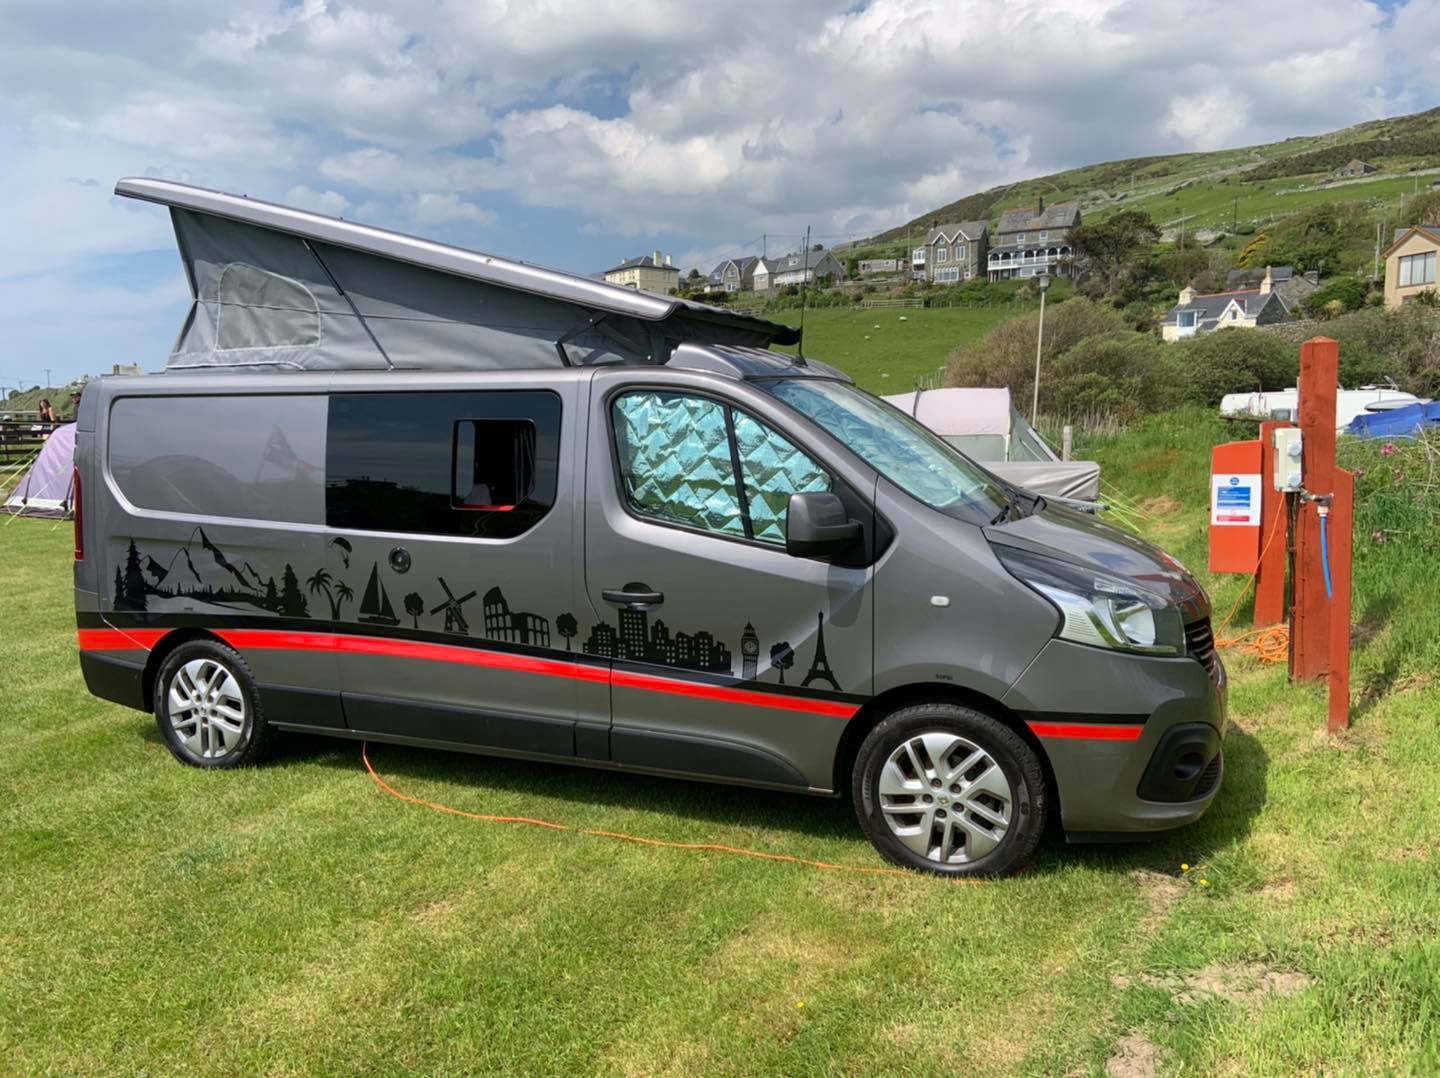 Photo of the Explorze Renault Trafic Adventure Campervan take by a customer.